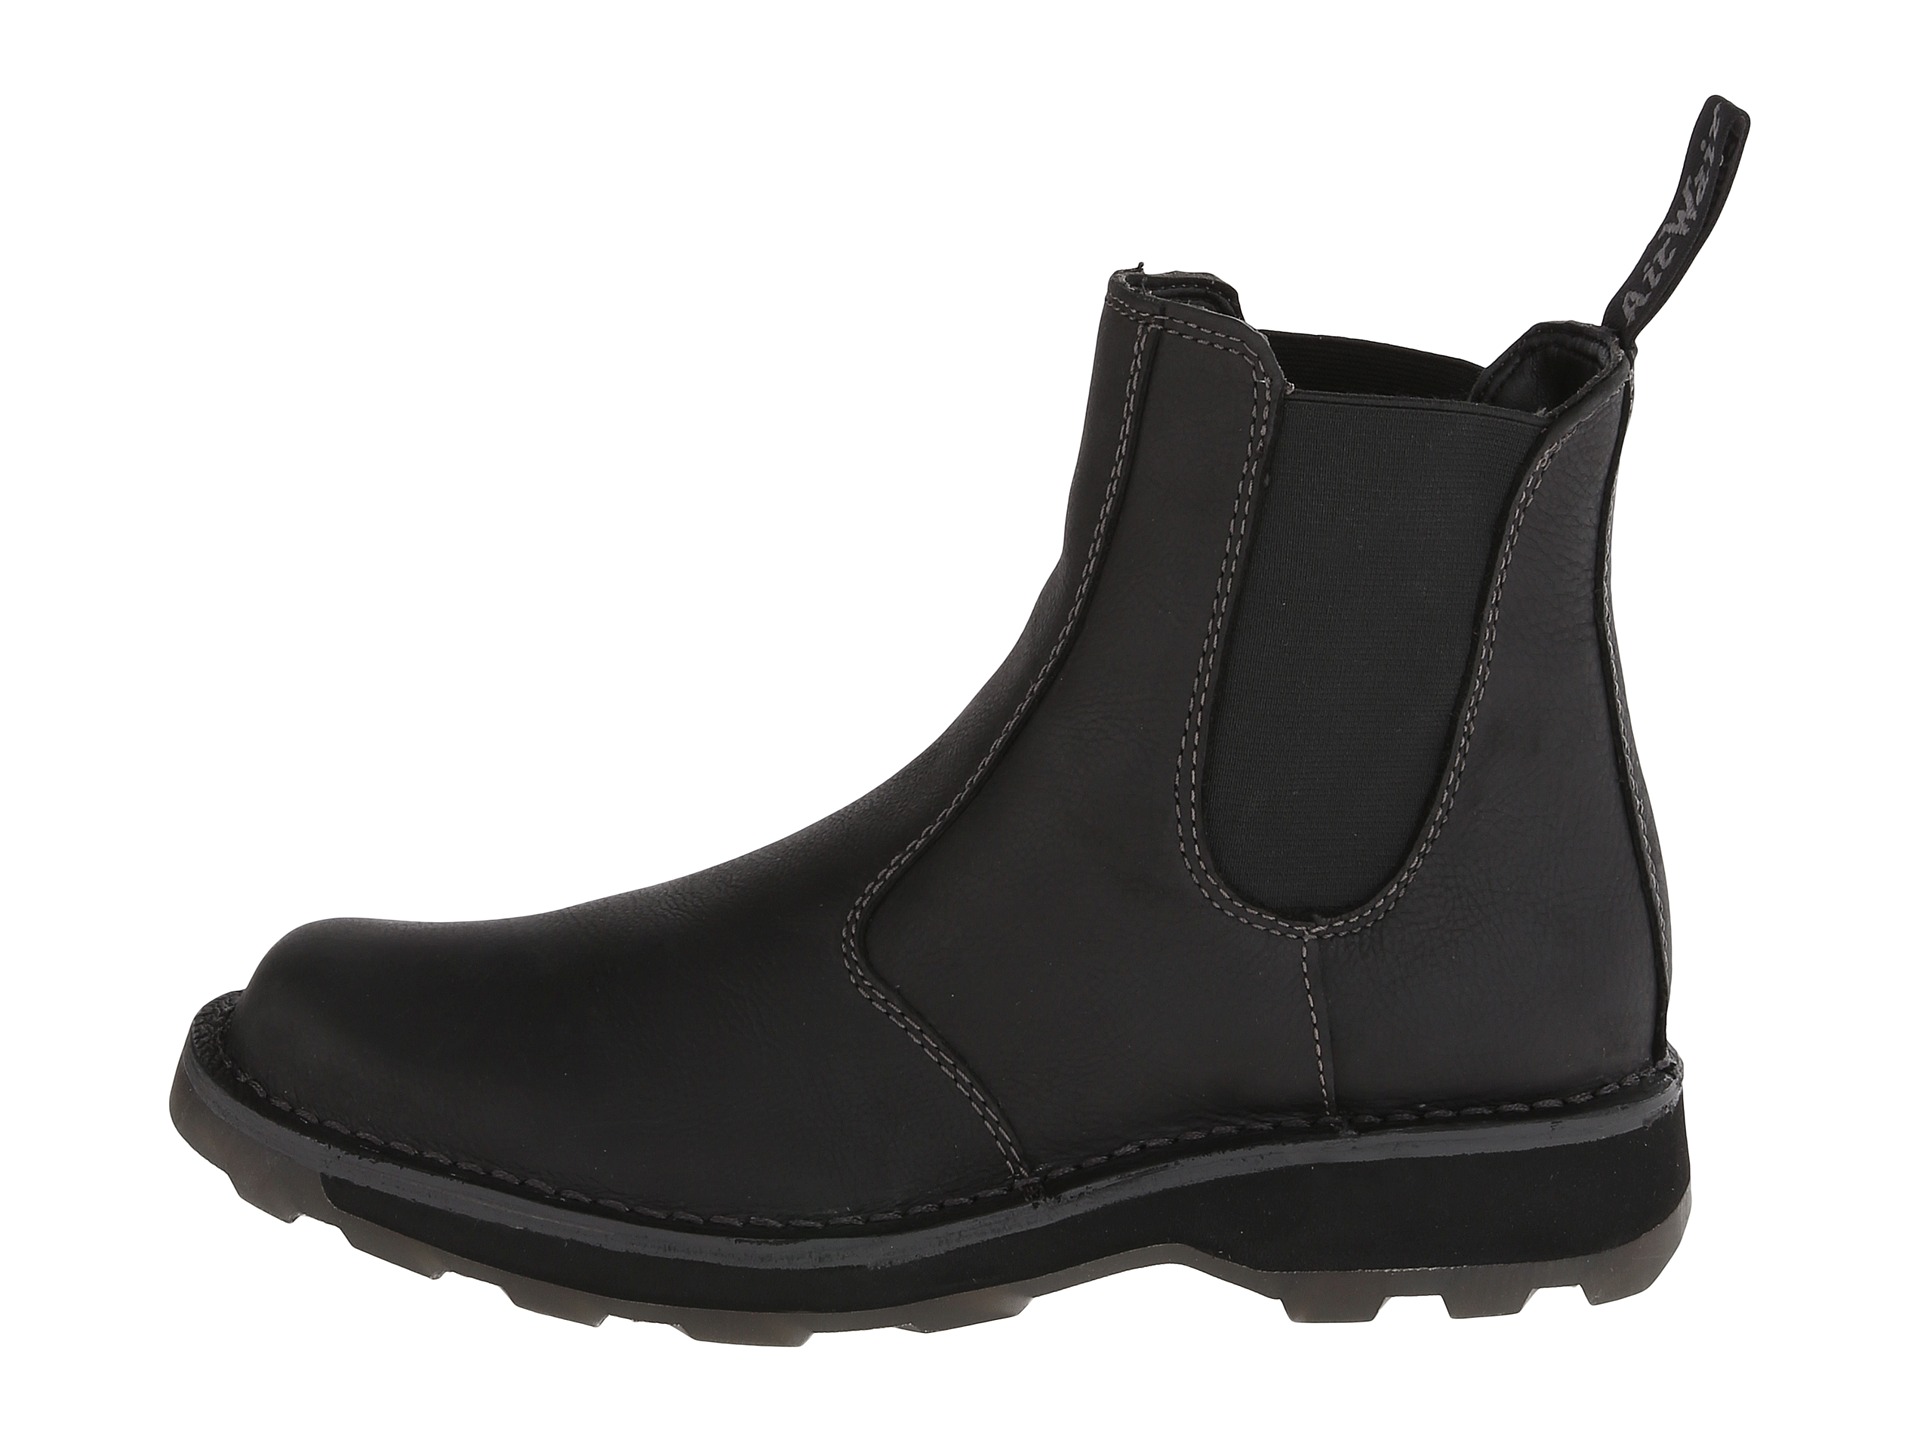 Dr Martens Walt Chelsea Boot Black Wyoming | Shipped Free at Zappos